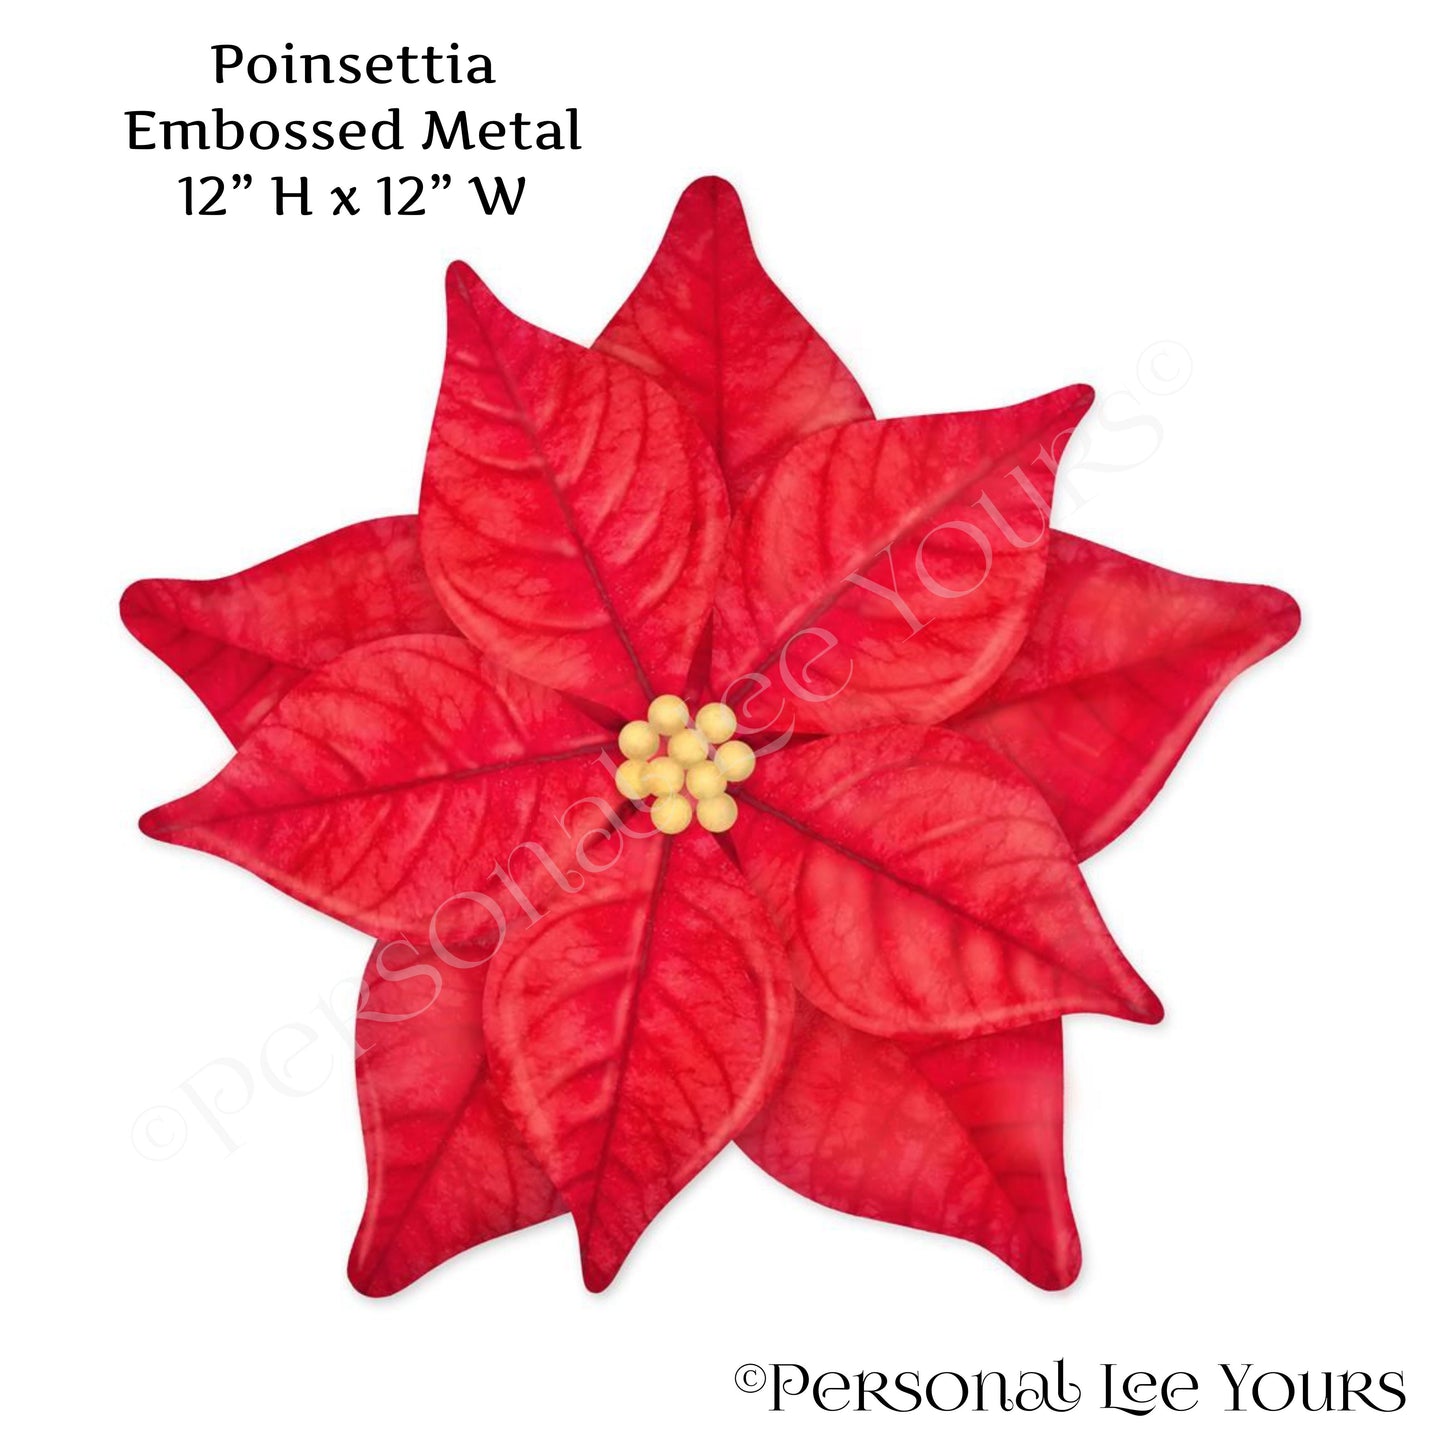 Wreath Accent * Poinsettia * Red/Golden Yellow * Embossed Metal * 12" W  x 12" H * Lightweight * MD101024